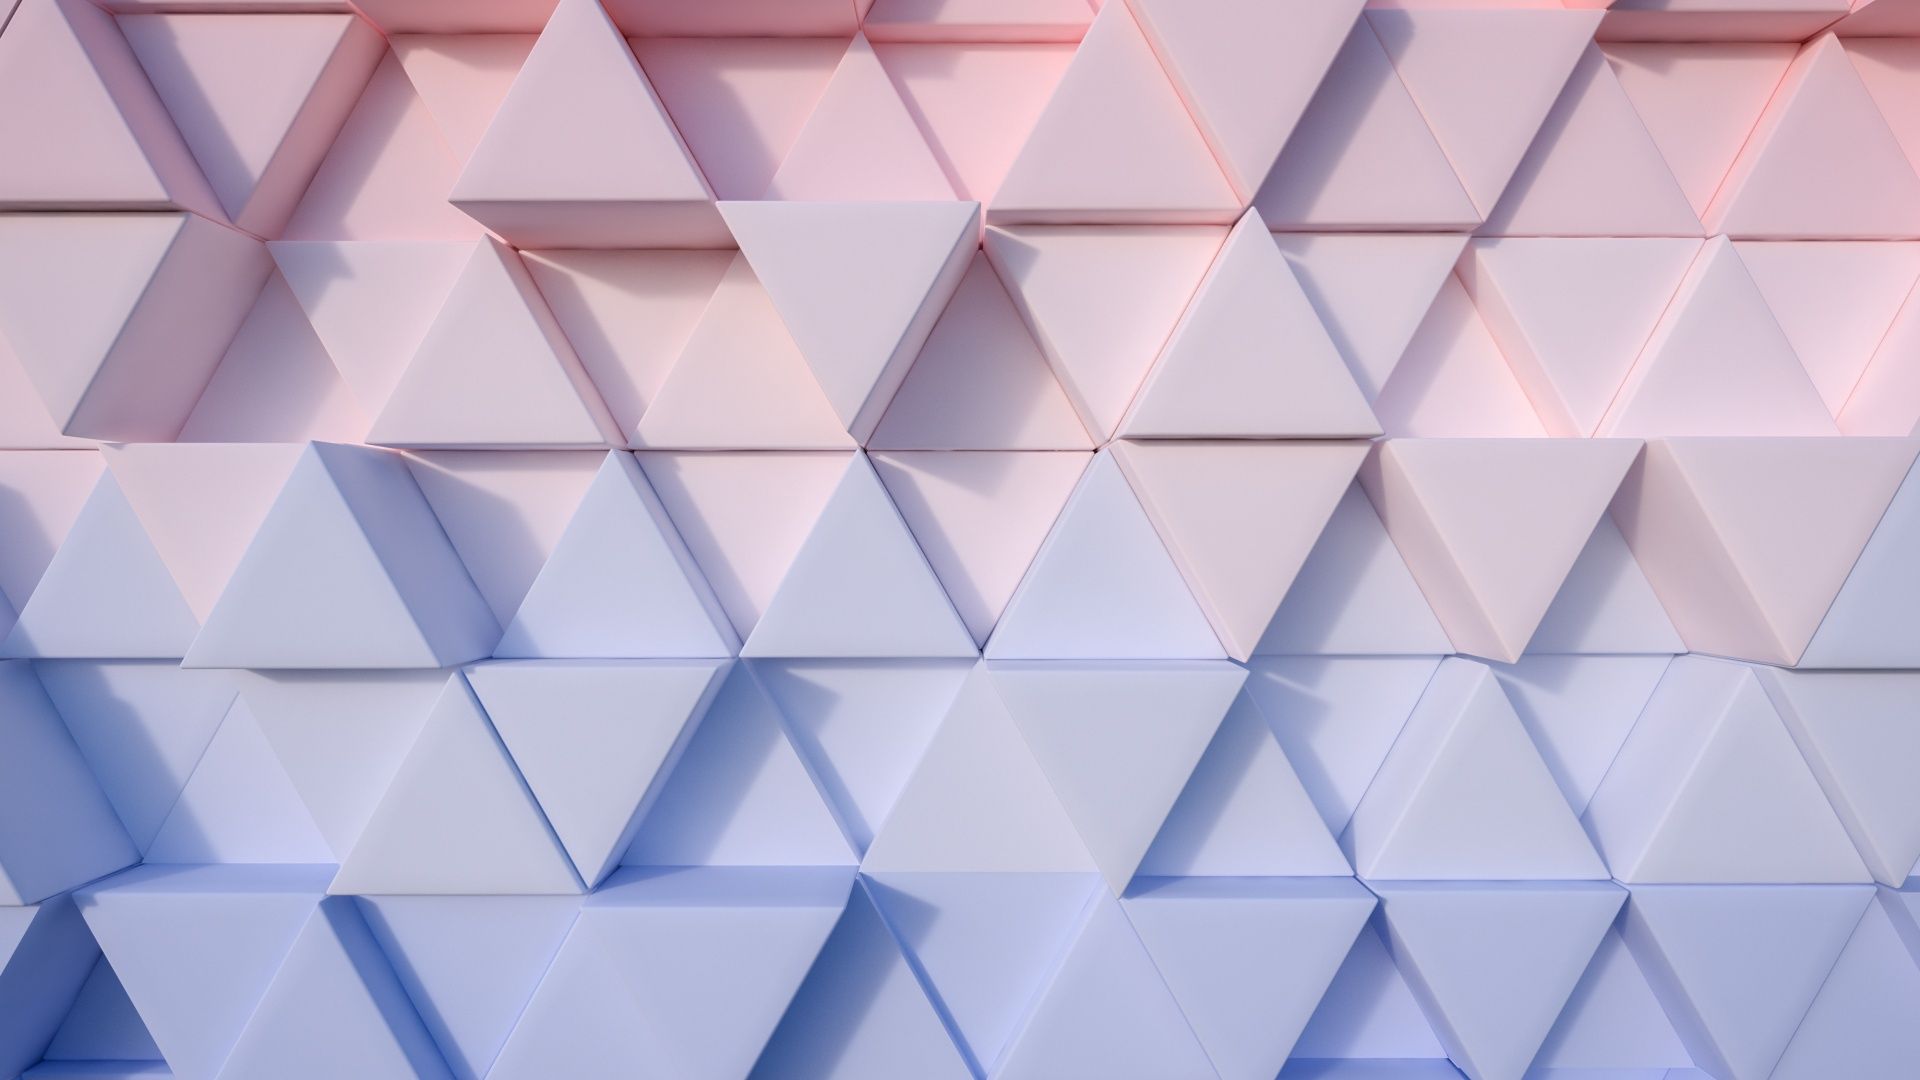 A wall of pink and blue 3D triangles - Desktop, Chromebook, funny